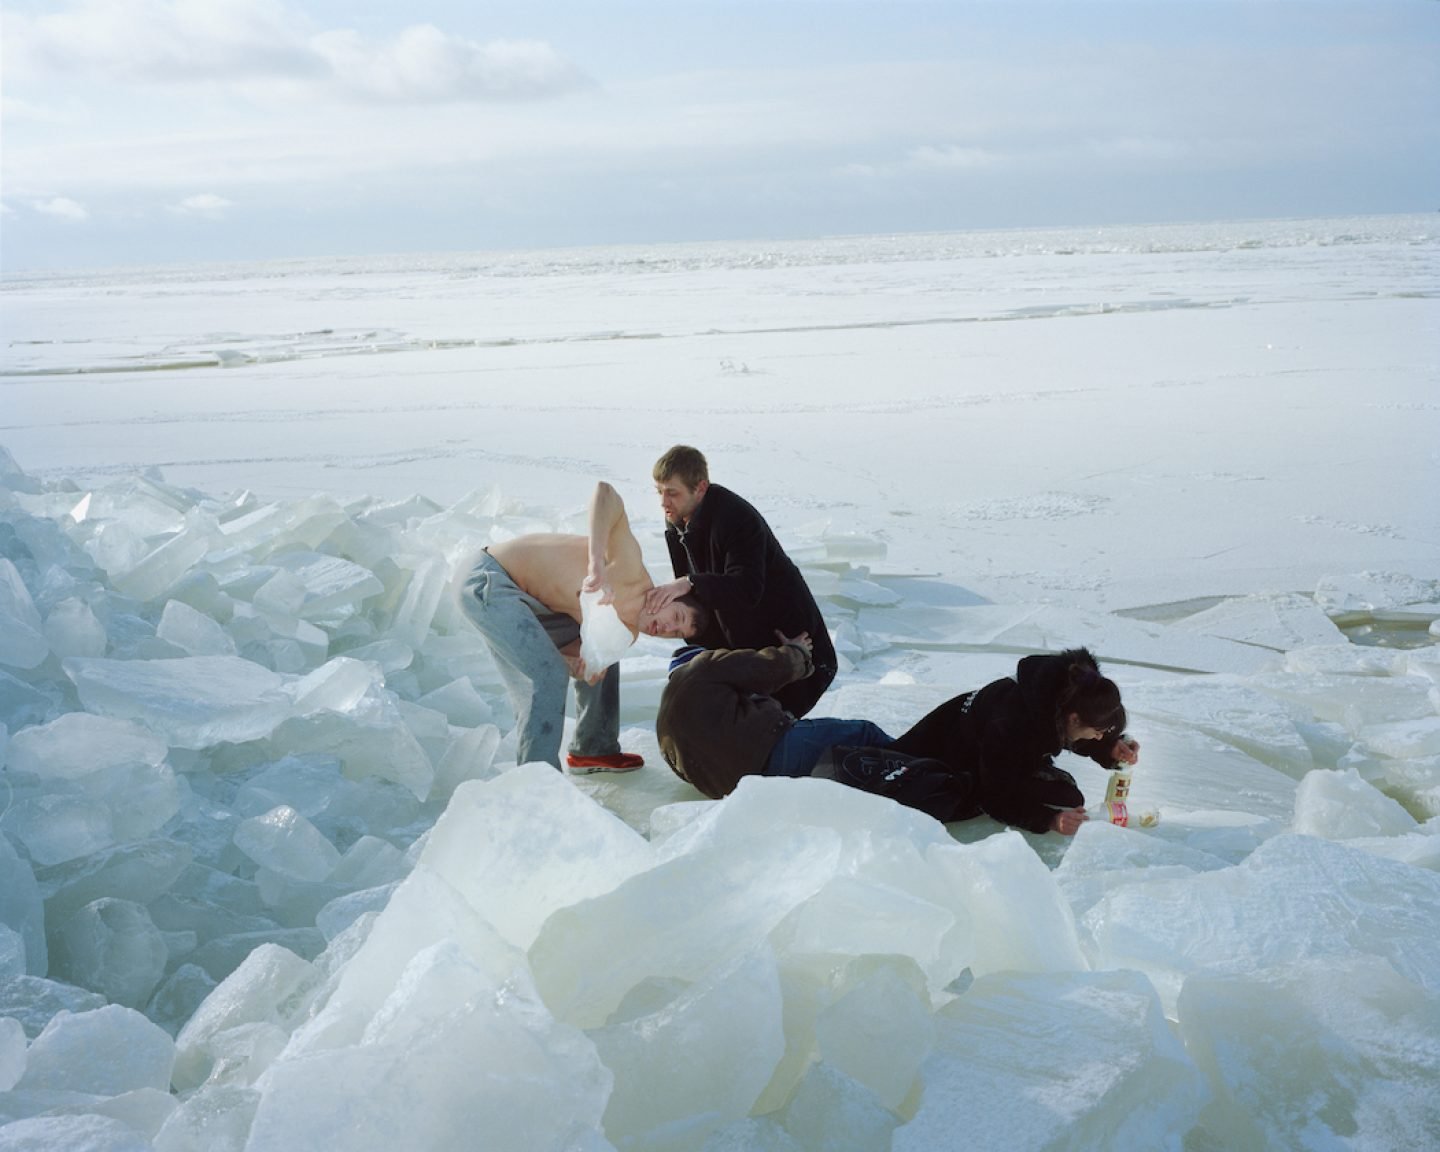 Drunk people on the frozen Gulf of Riga, 2013.